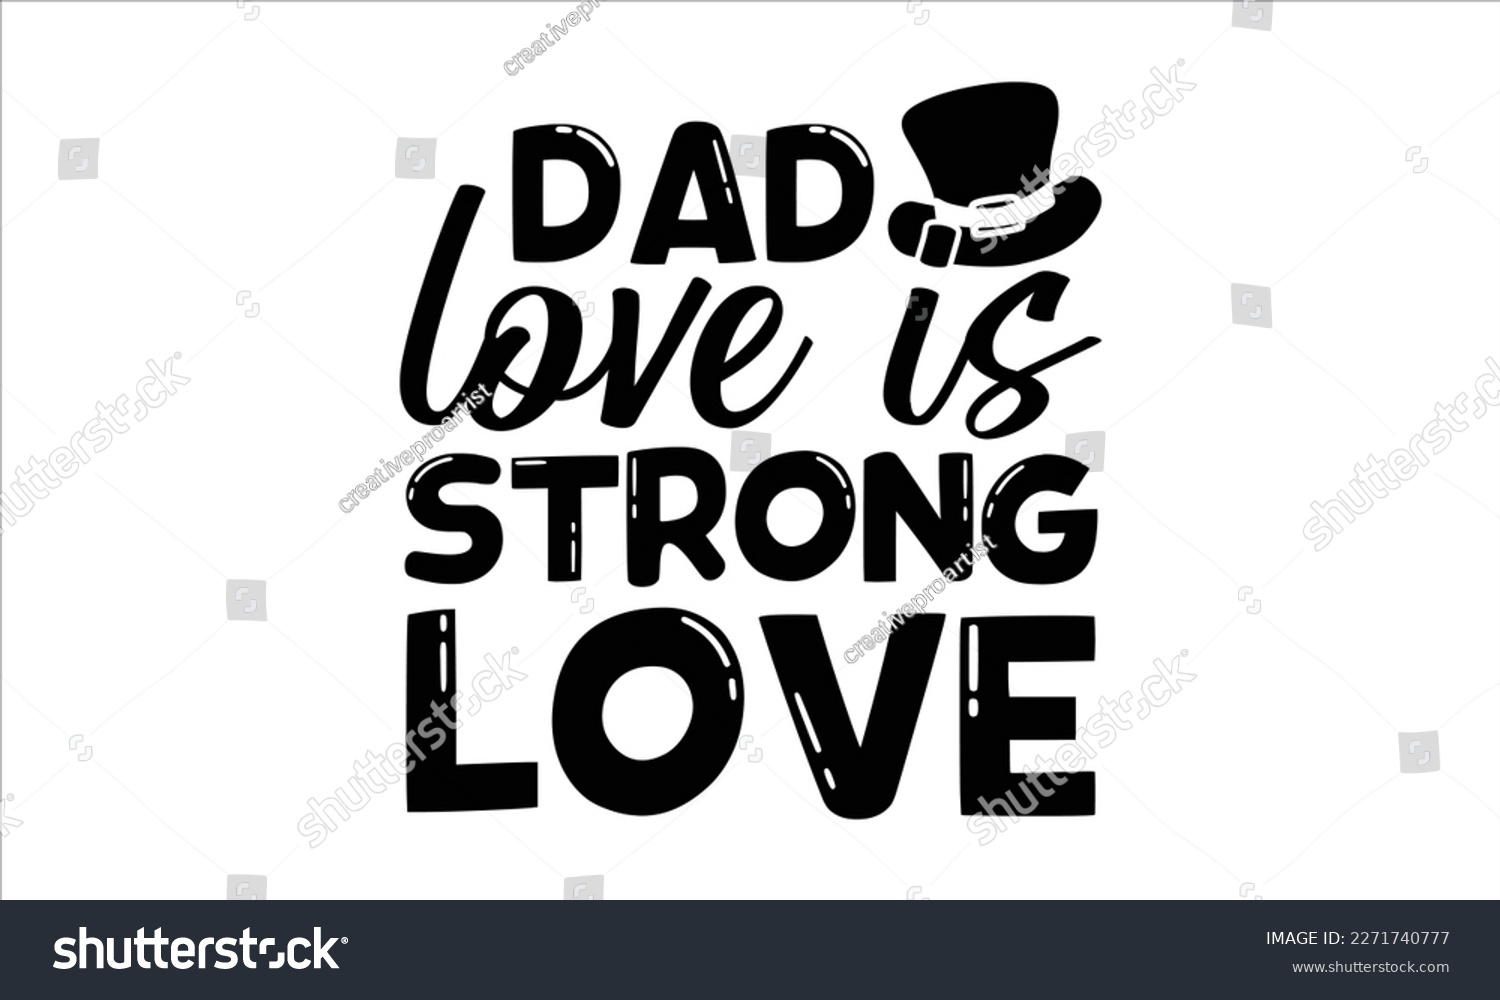 SVG of Dad love is strong love- Father's Day svg design, Hand drawn lettering phrase isolated on white background, Illustration for prints on t-shirts and bags, posters, cards eps 10. svg